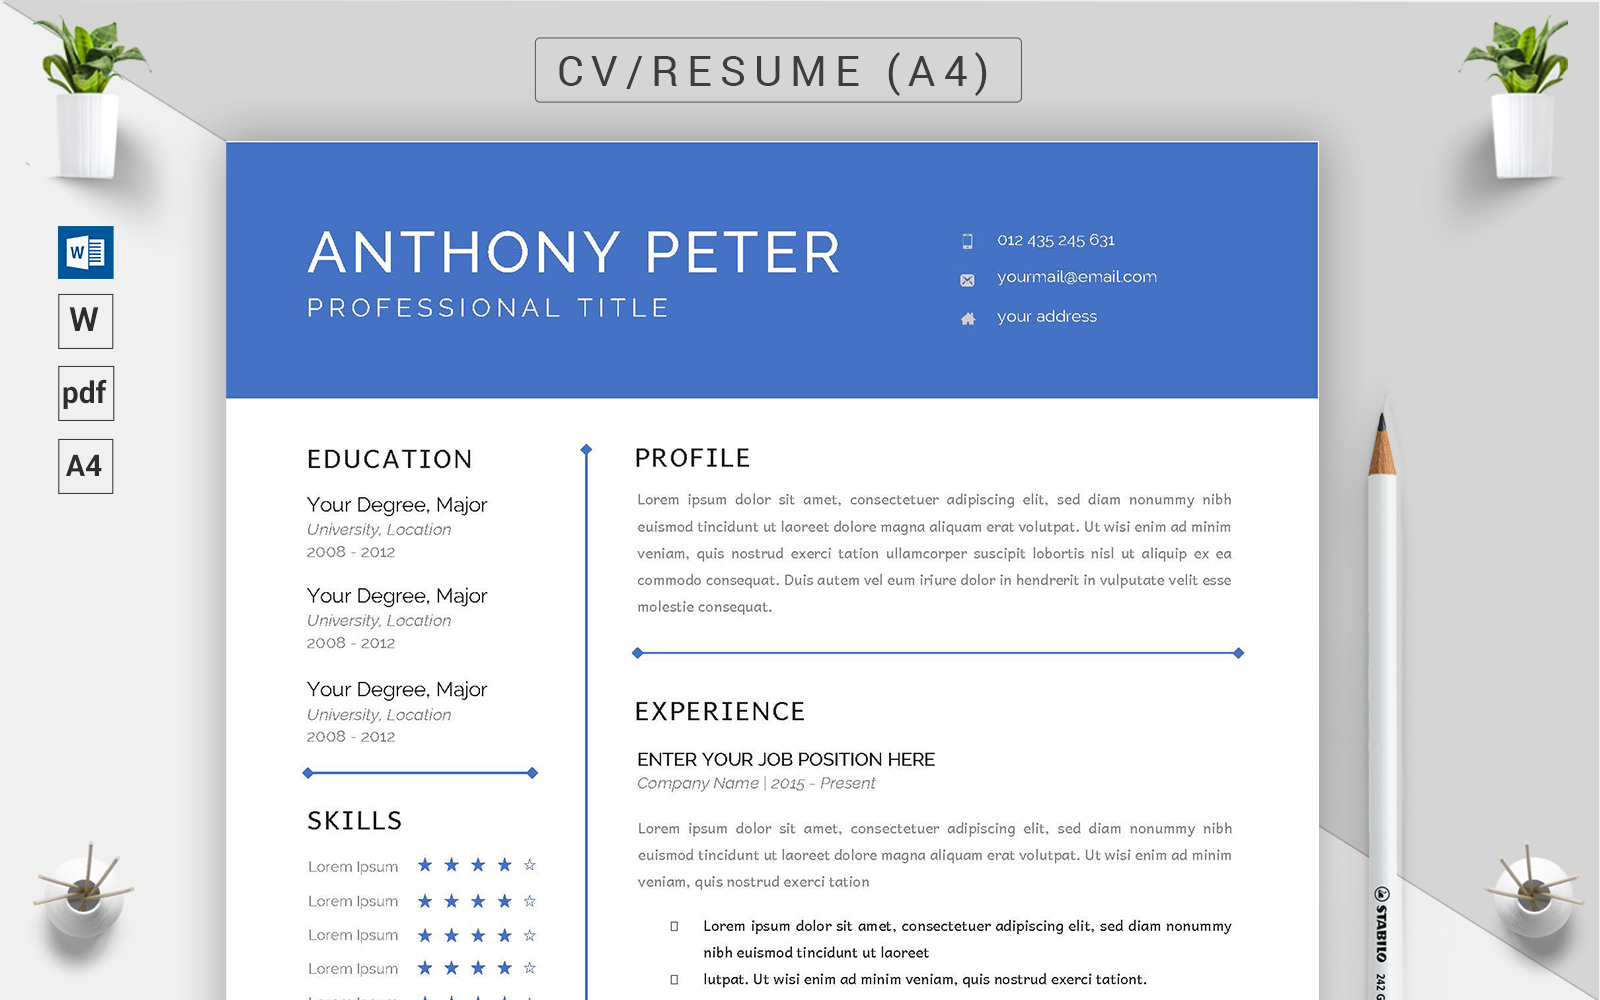 Anthony Peter - CV Resume Template